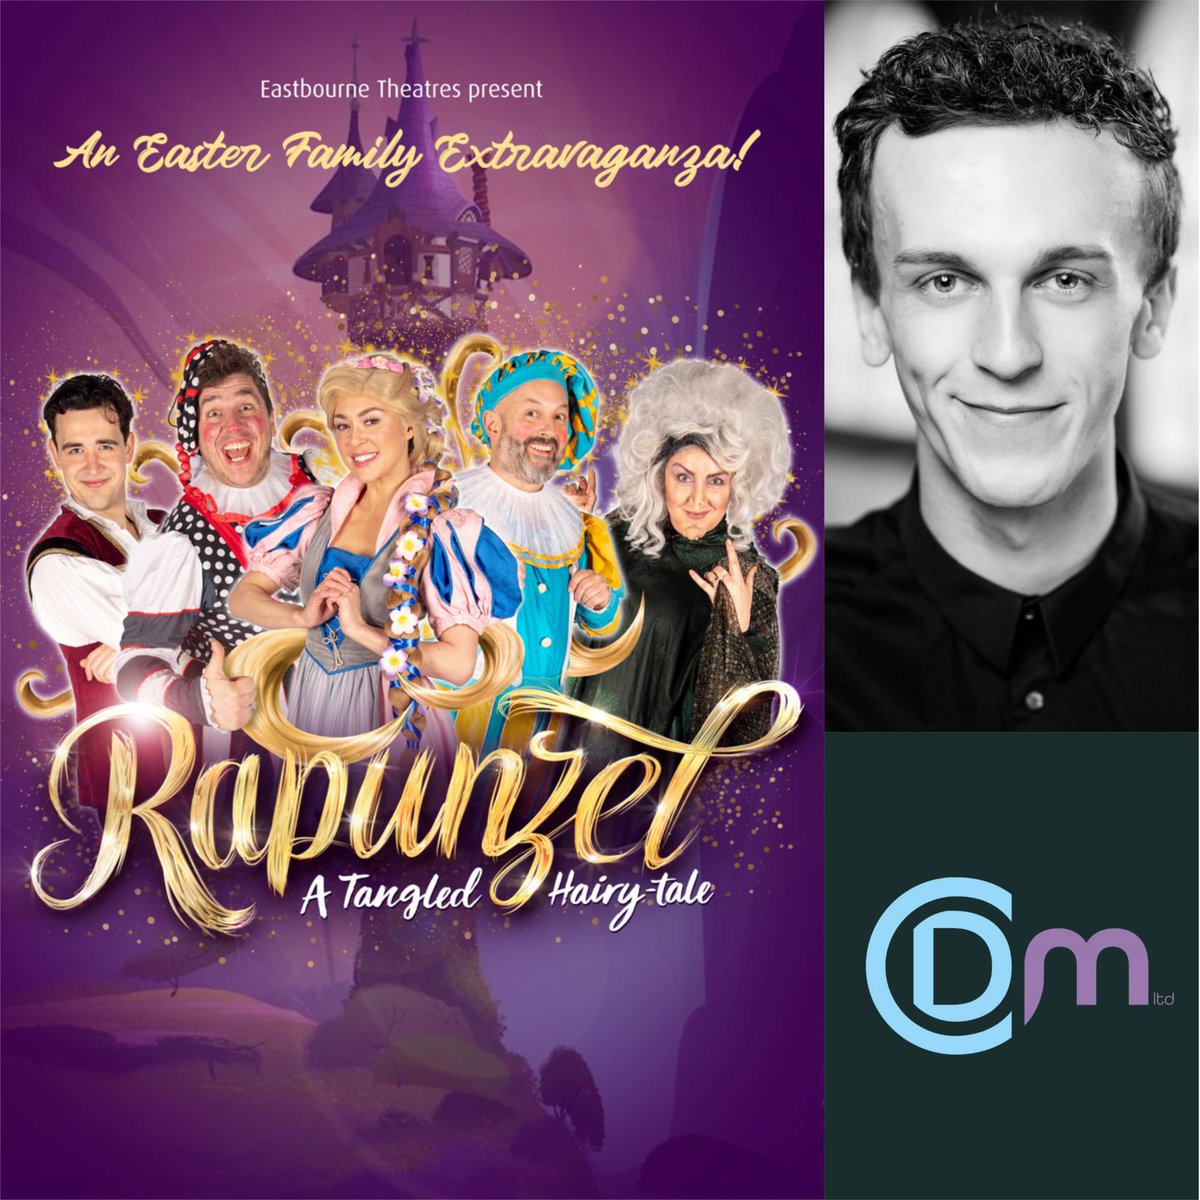 Break a leg to CALLUM DYER who opens today as Ensemble in Rapunzel at the Gordon Craig Theatre, Stevenage. The Easter panto produced by Eastbourne Theatres then tours to the Devonshire Park Theatre, Eastbourne and The Woodville, Gravesend finishing on 10 April. @GCTStevenage